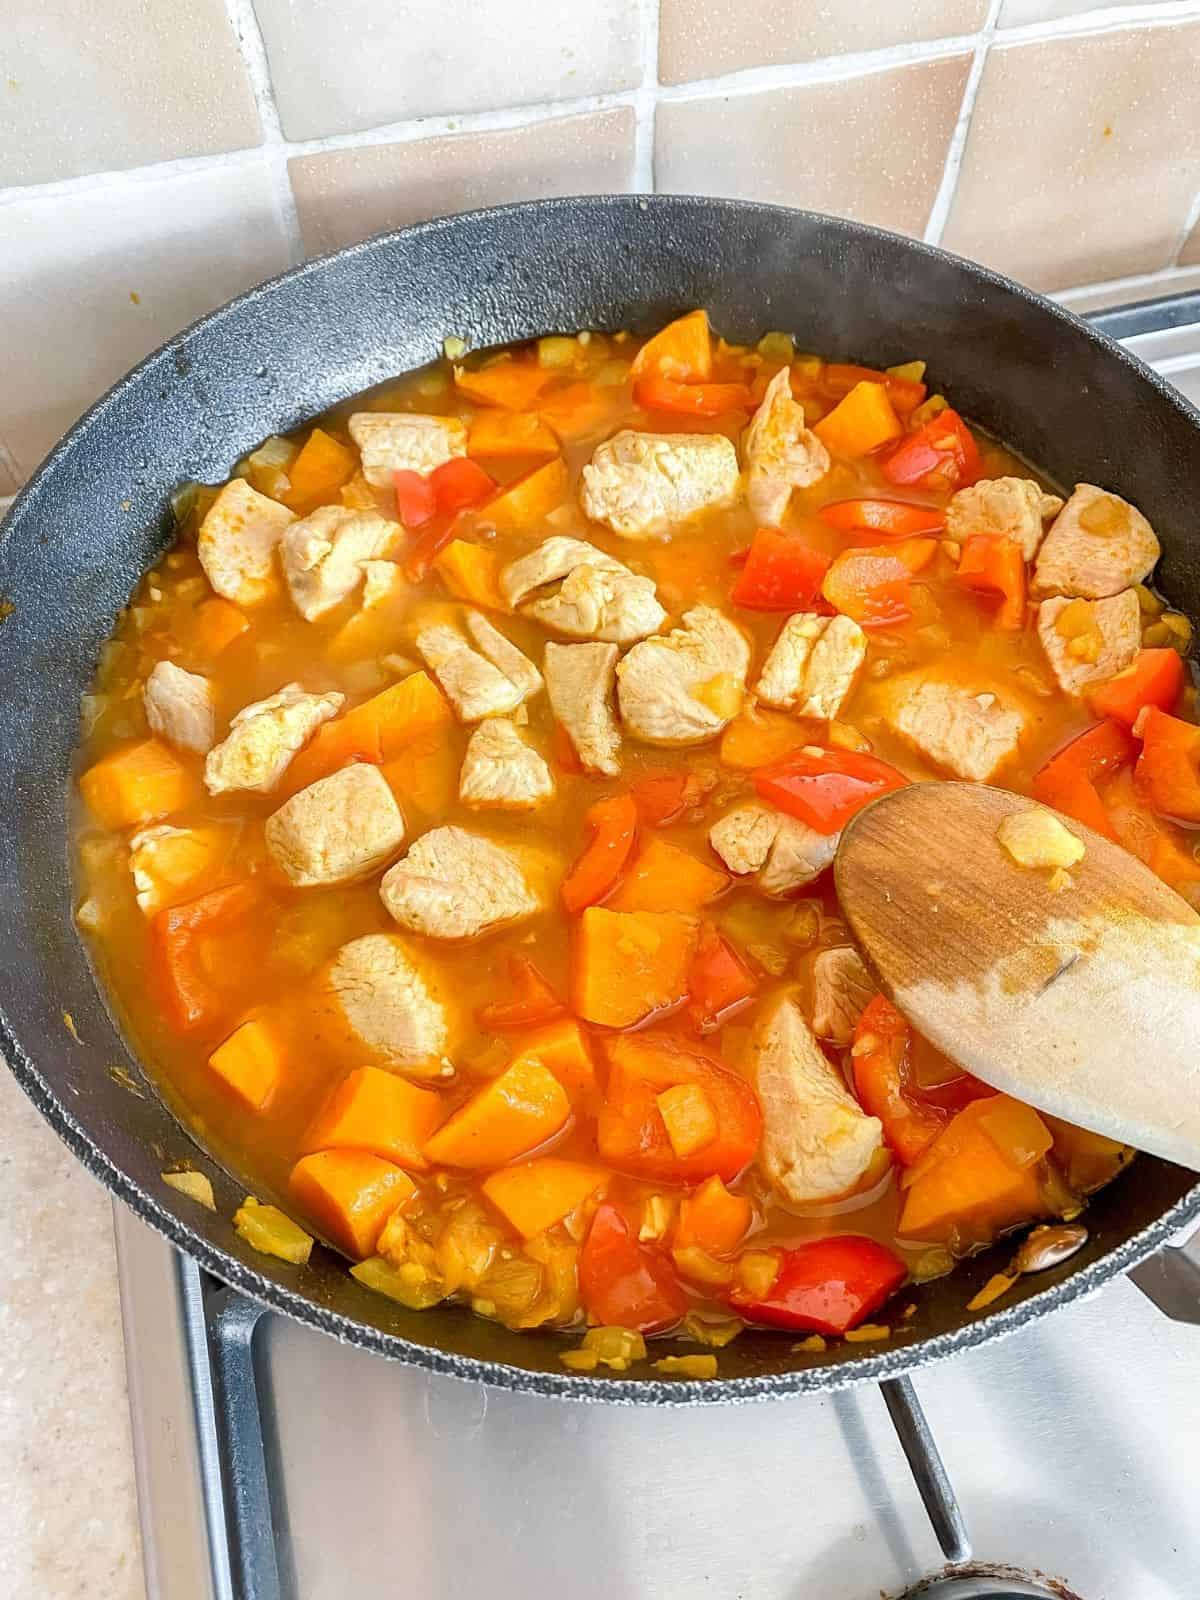 turkey and vegetables in a pan